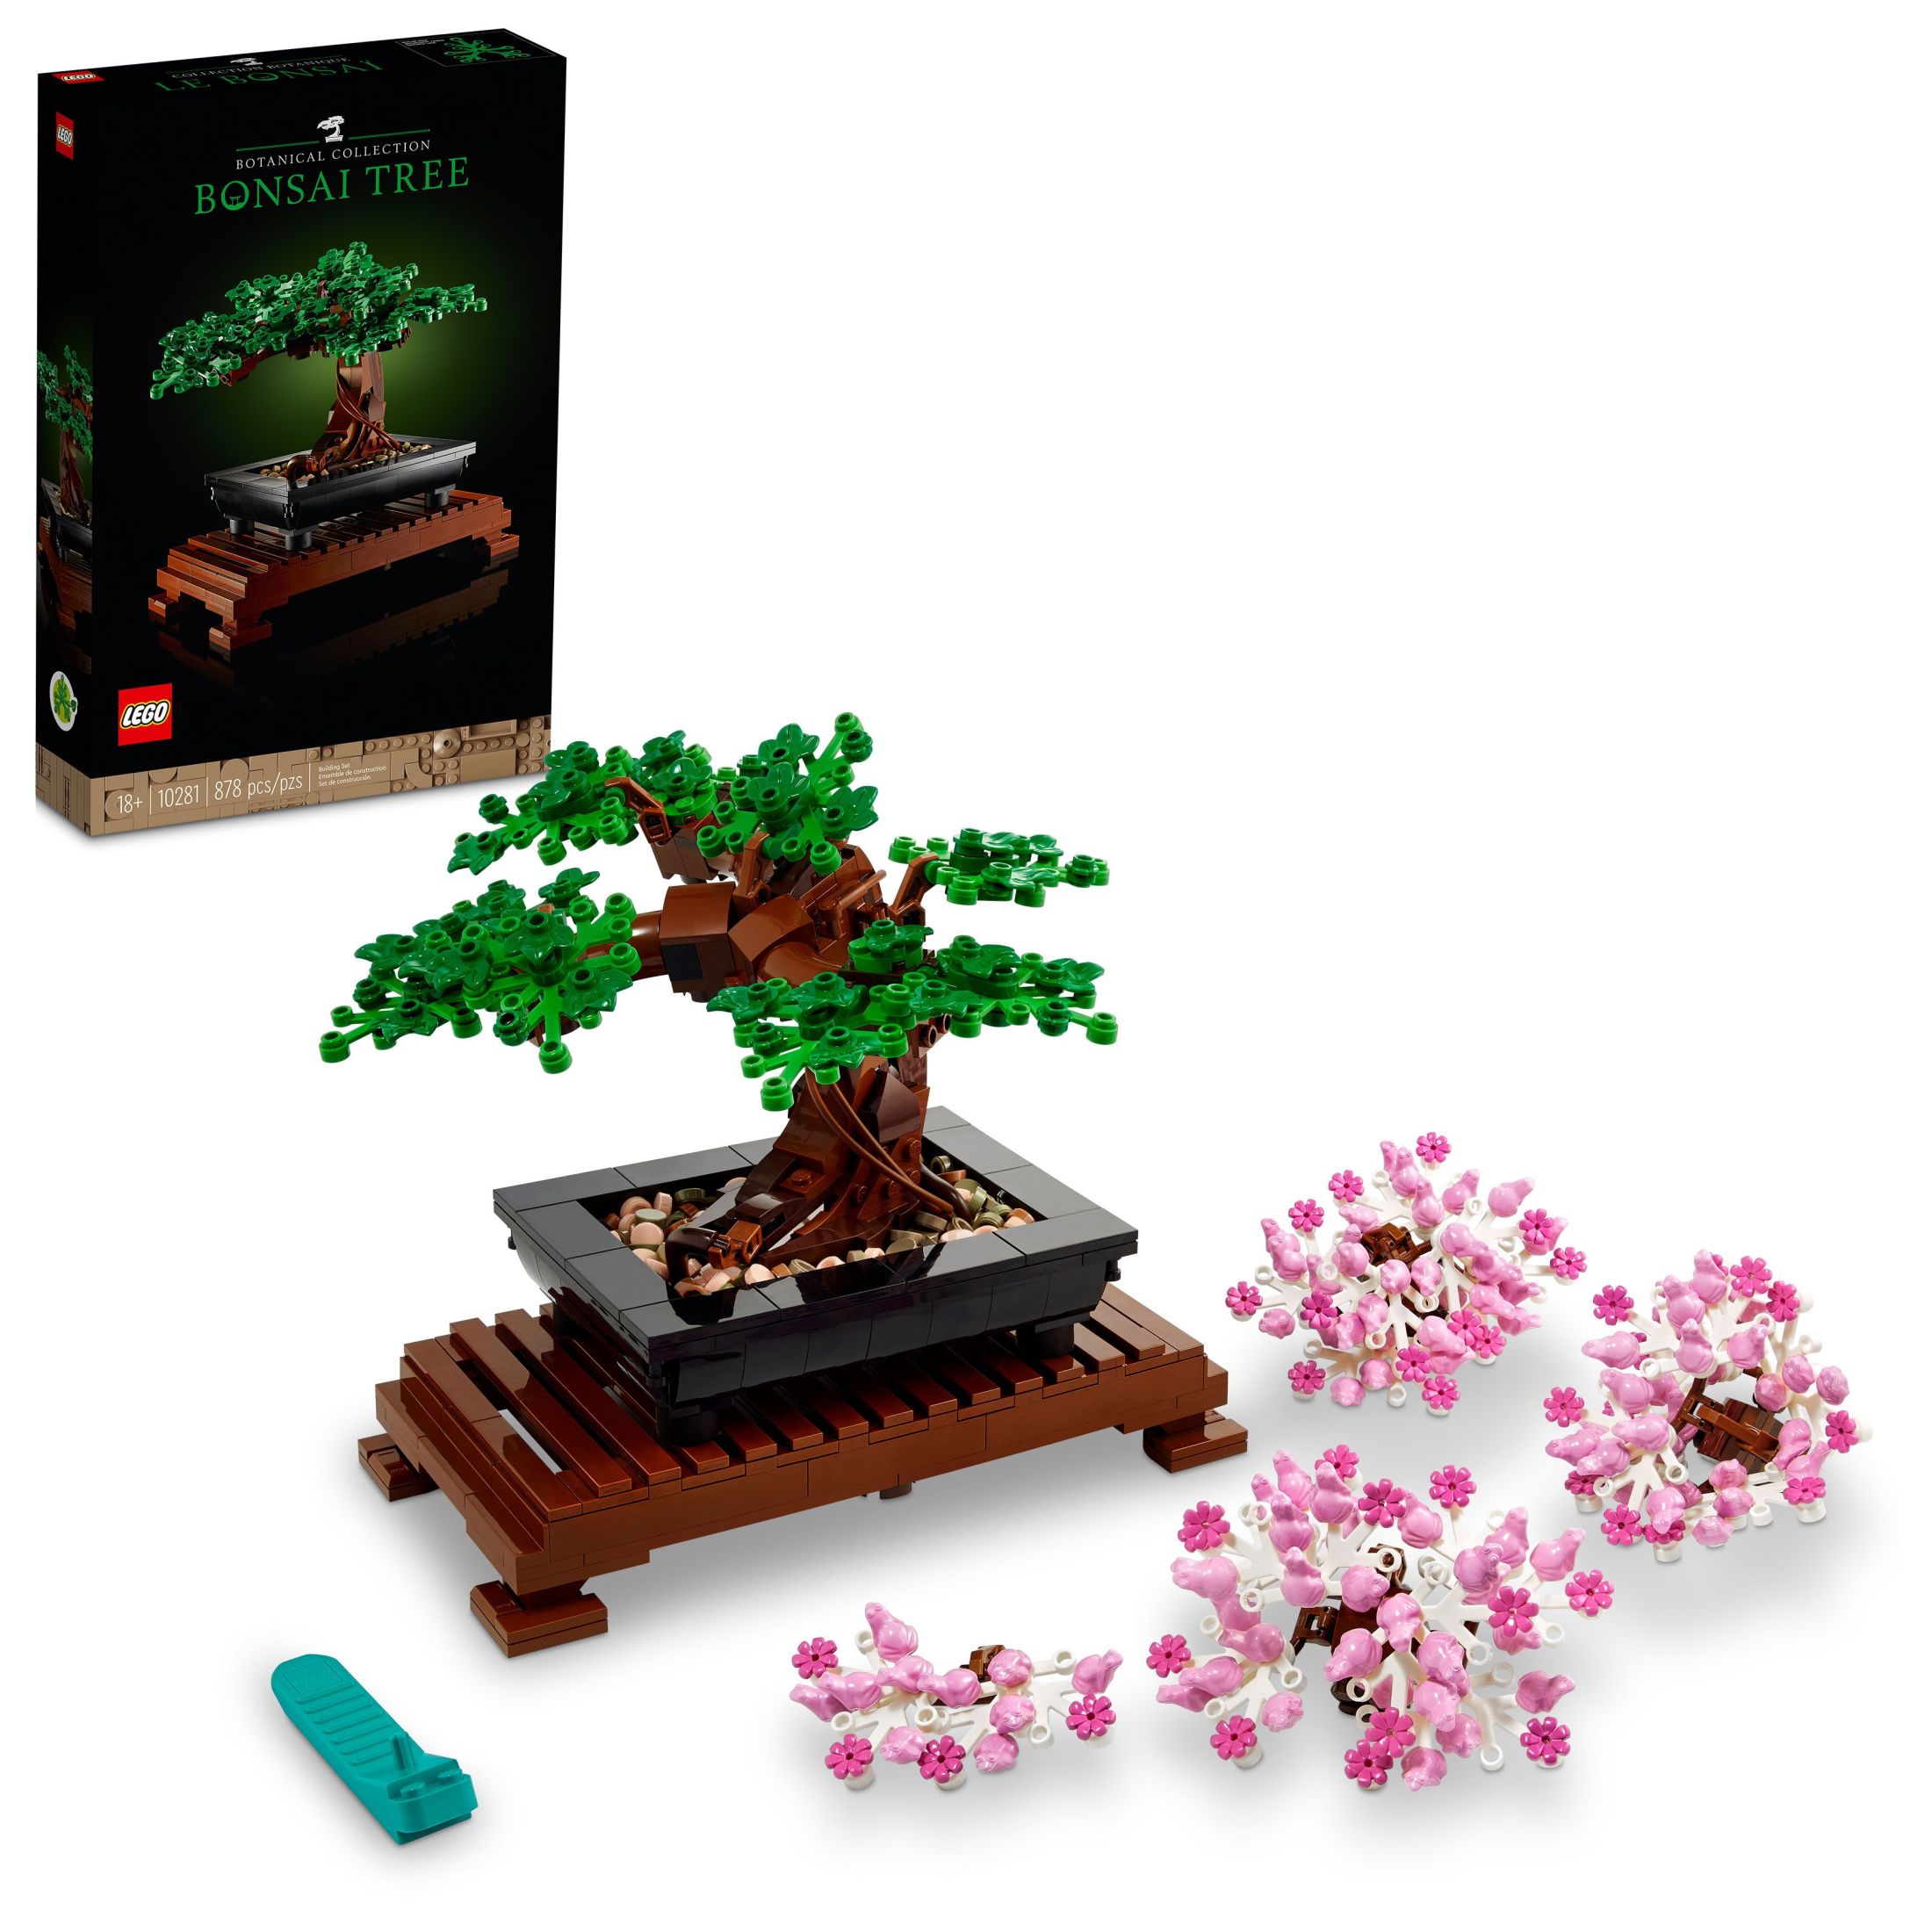 LEGO Icons Bonsai Tree Building Set, Features Cherry Blossom Flowers, Adult DIY Plant Model, Creative Gift for Home Décor, Office Art or Mother's Day Decoration, Botanical Collection Design Kit, 10281 - image 1 of 9